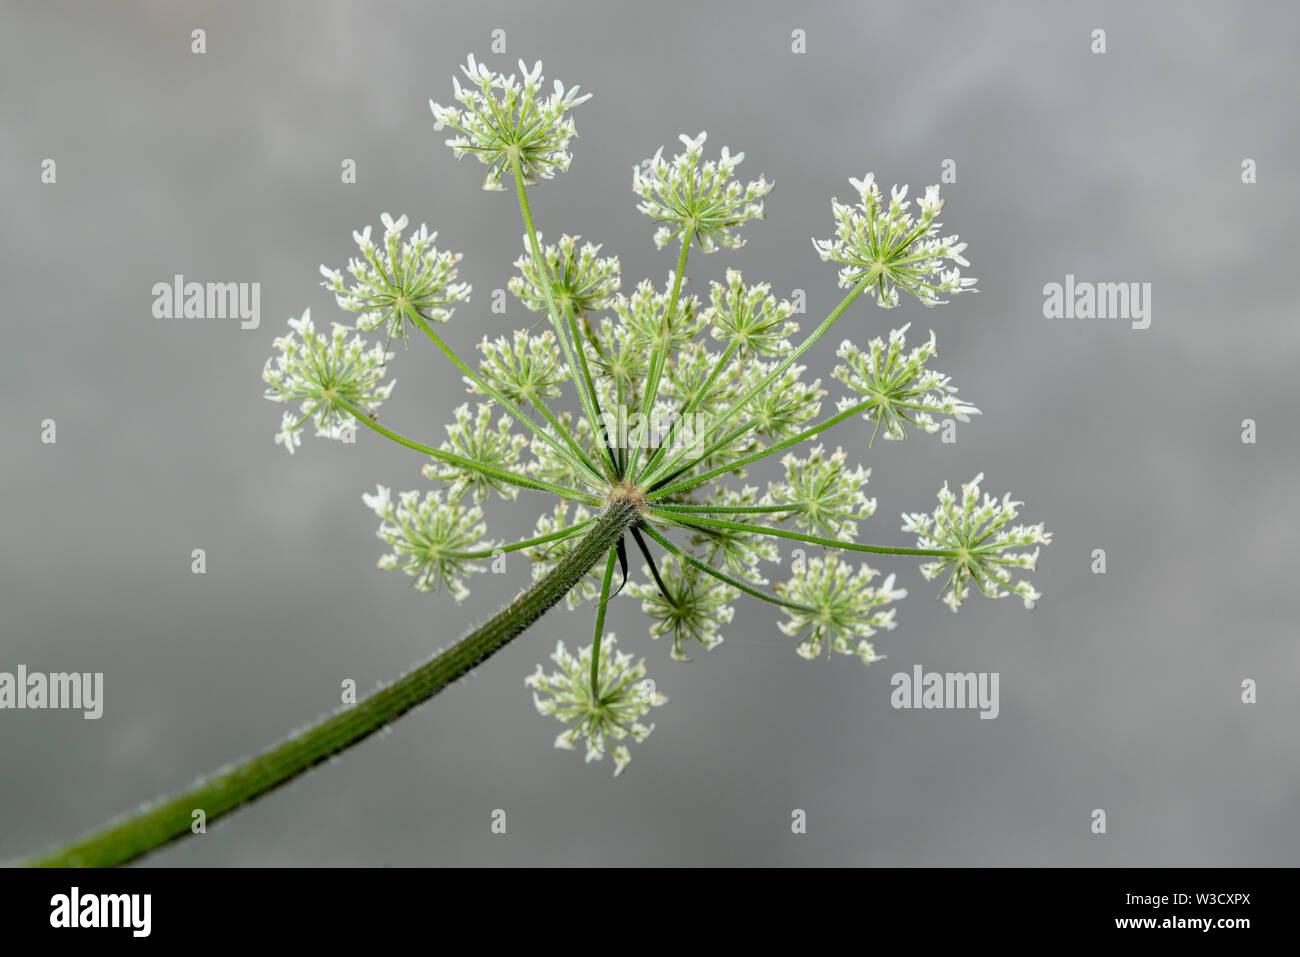 The invasive plant specifies Giant Hogweed (Heracleum mantegazzianum) growing in the UK. Stock Photo